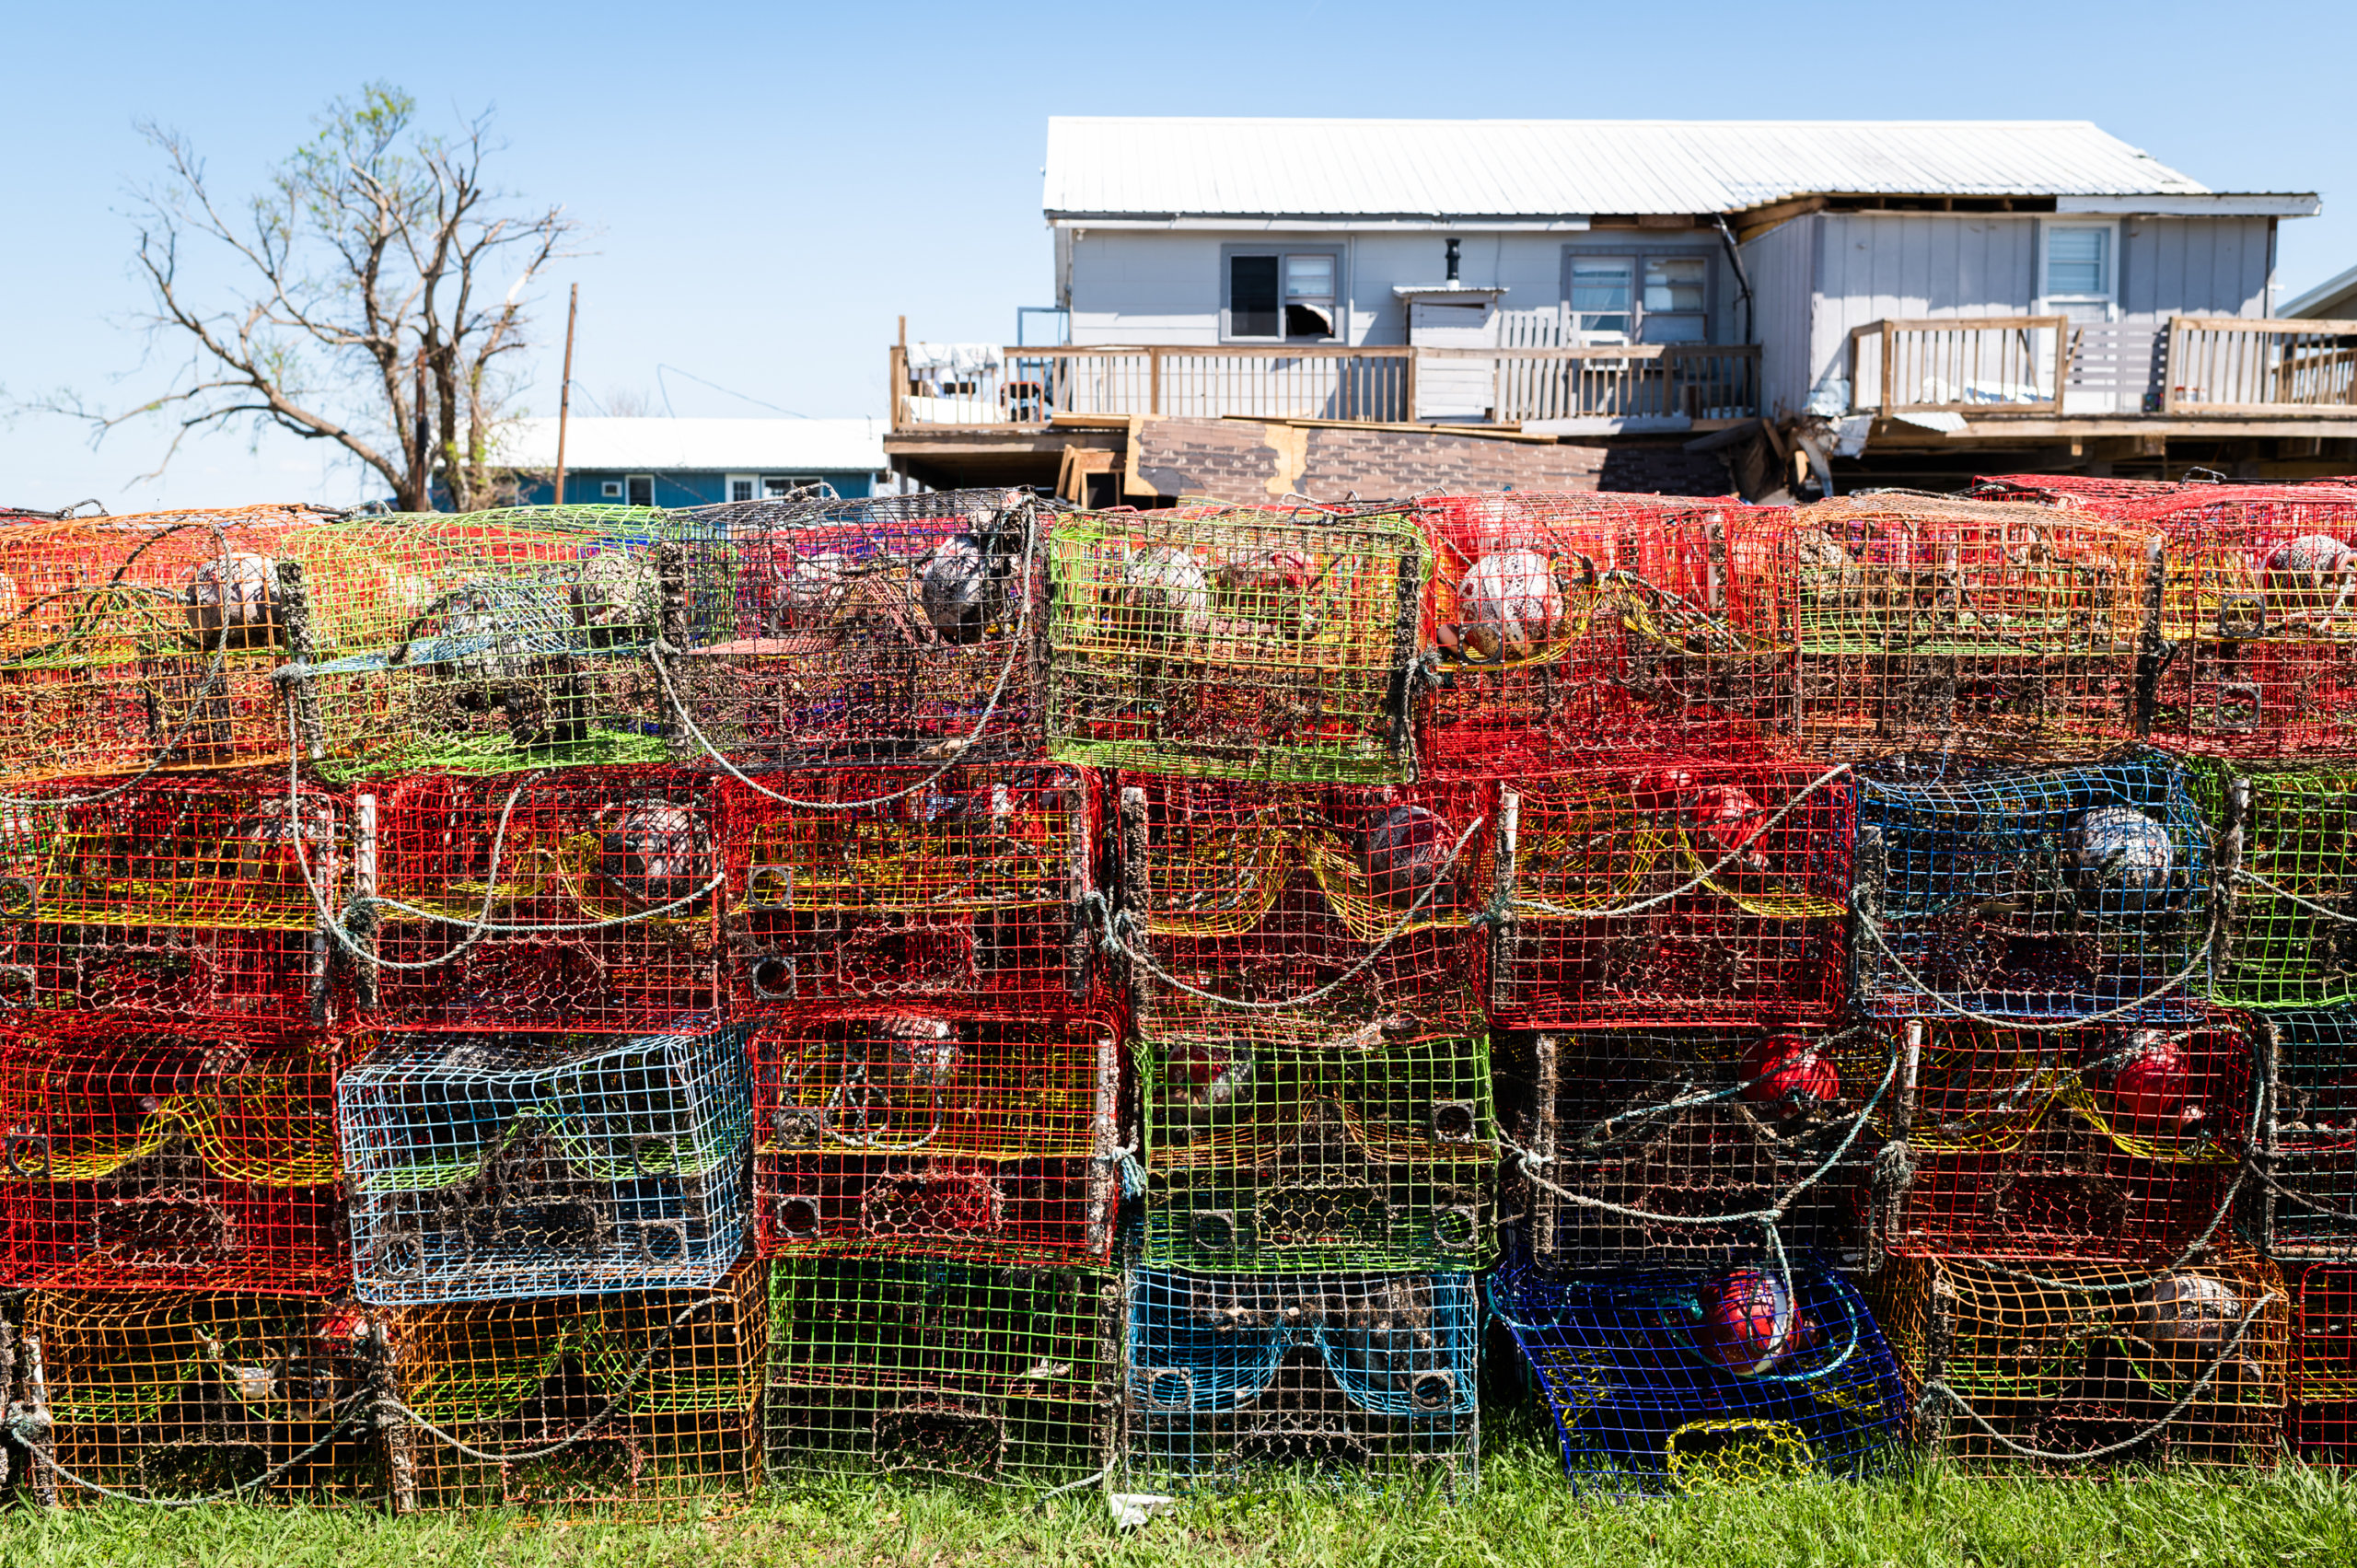 Luis's crab traps, stacked in the yard and ready to use once the dock can make ice